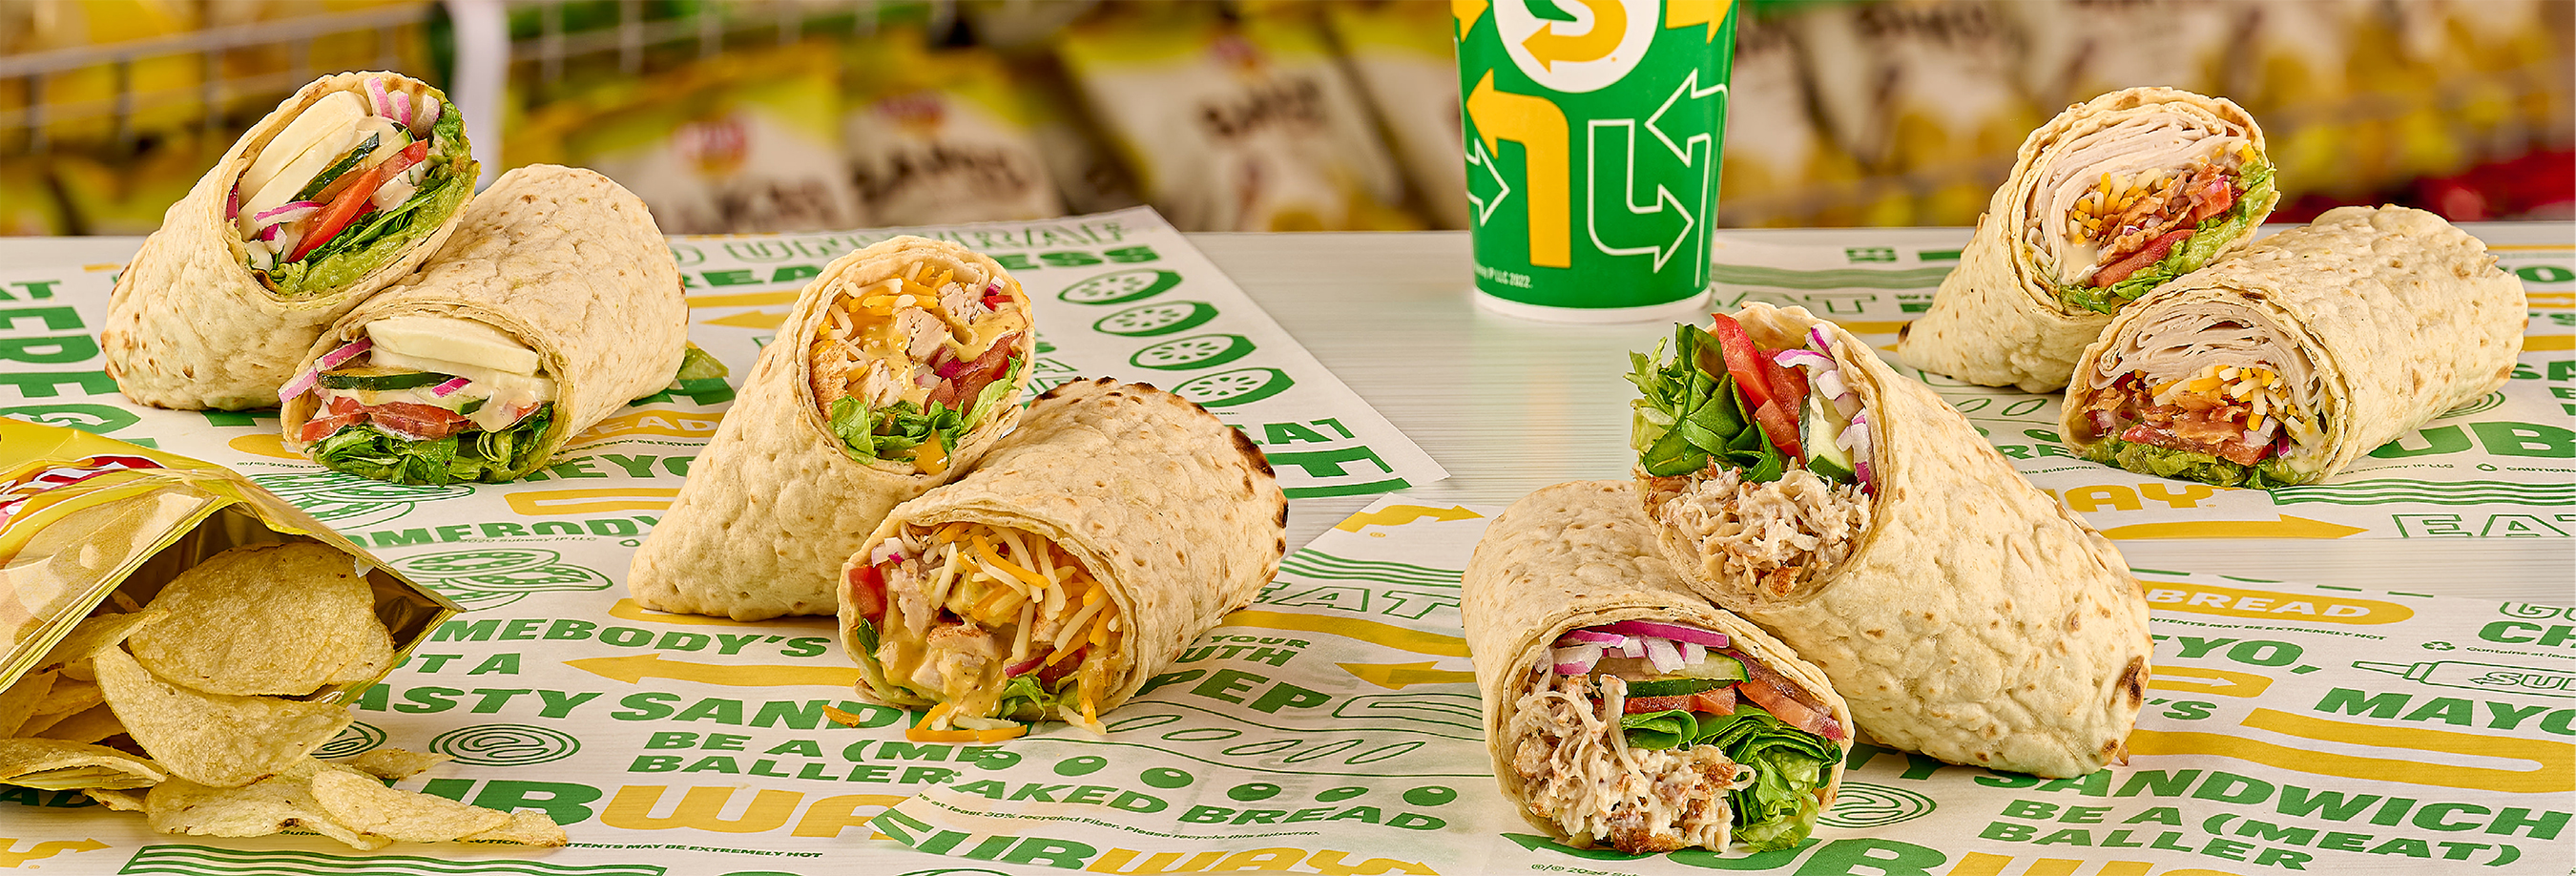 Subway has introduced four new wraps, served on hearty, lavash-style flatbread.